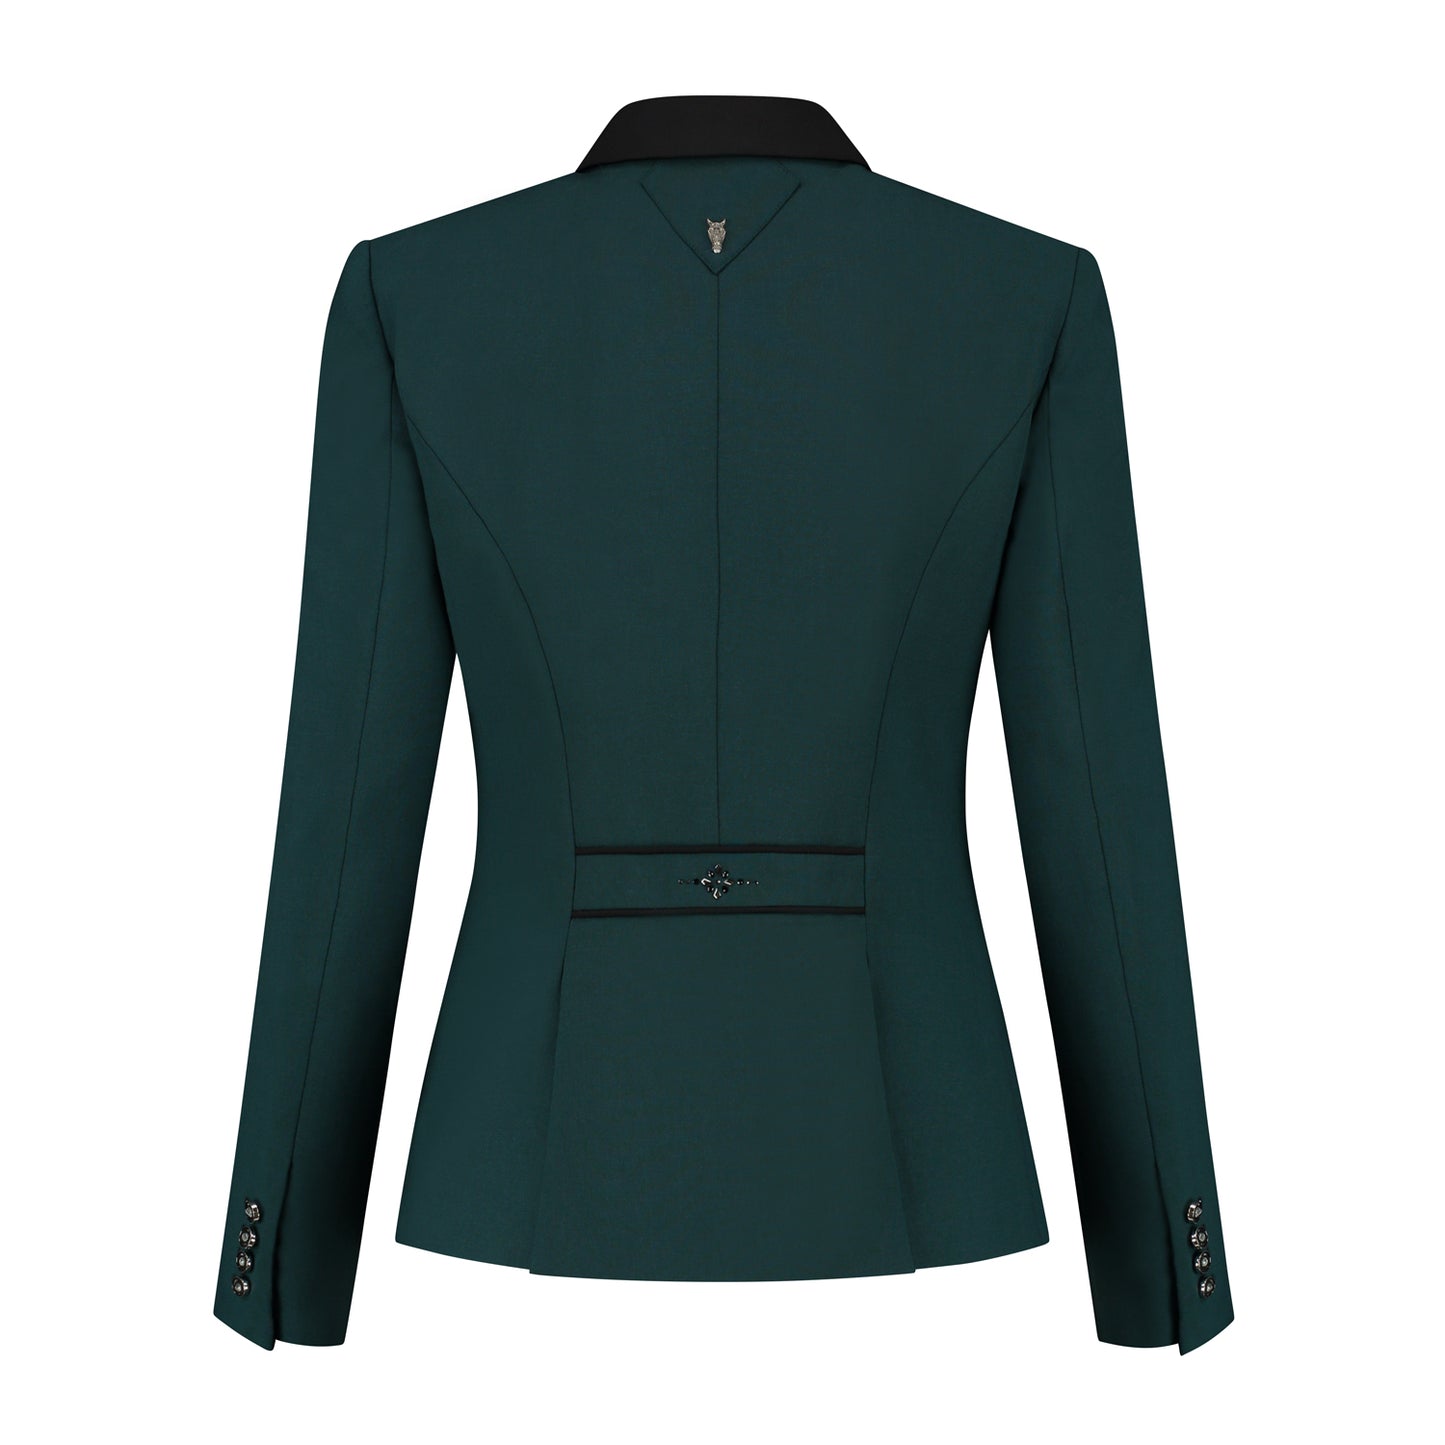 Competition jacket - Emerald